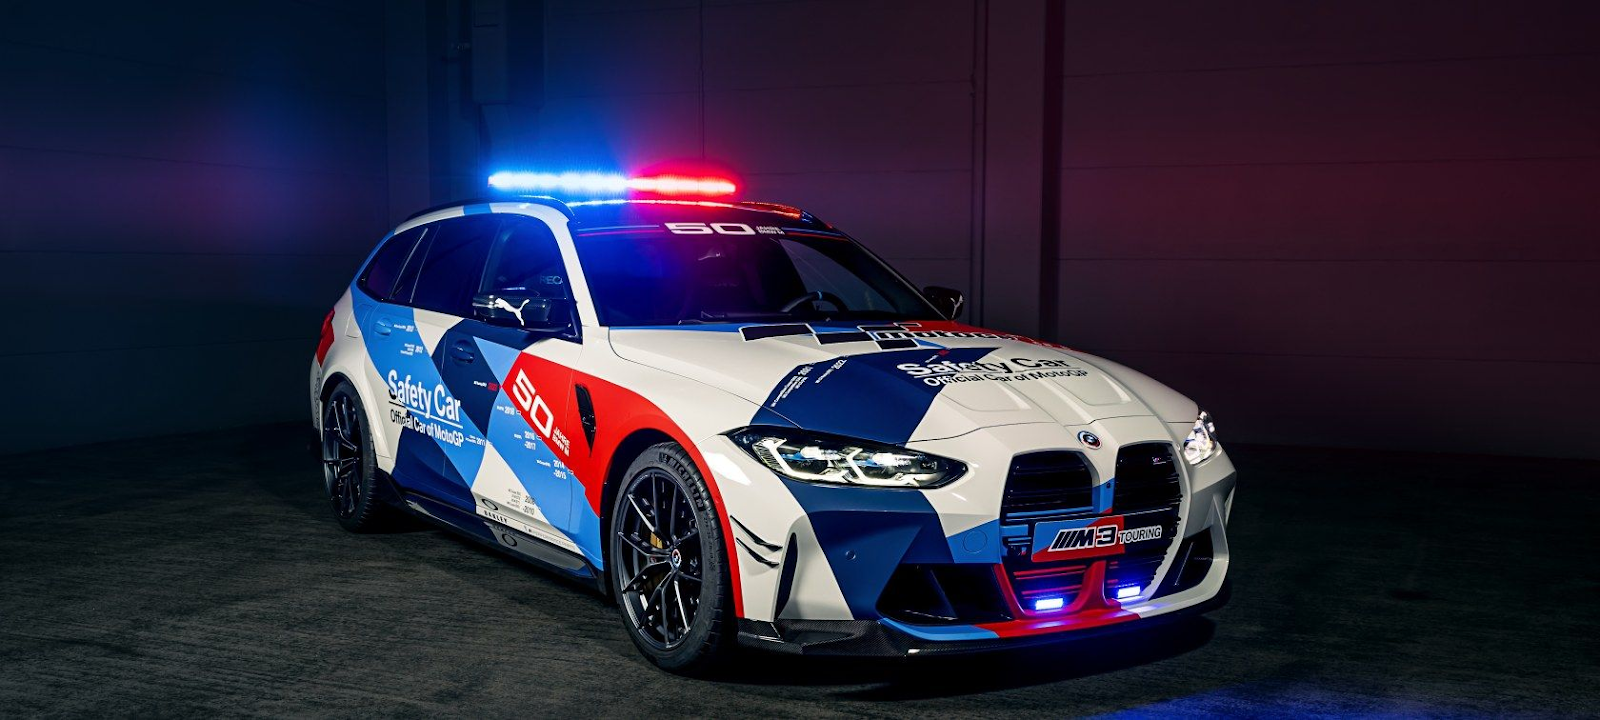 New BMW M3 Touring Safety Car debuts at Goodwood